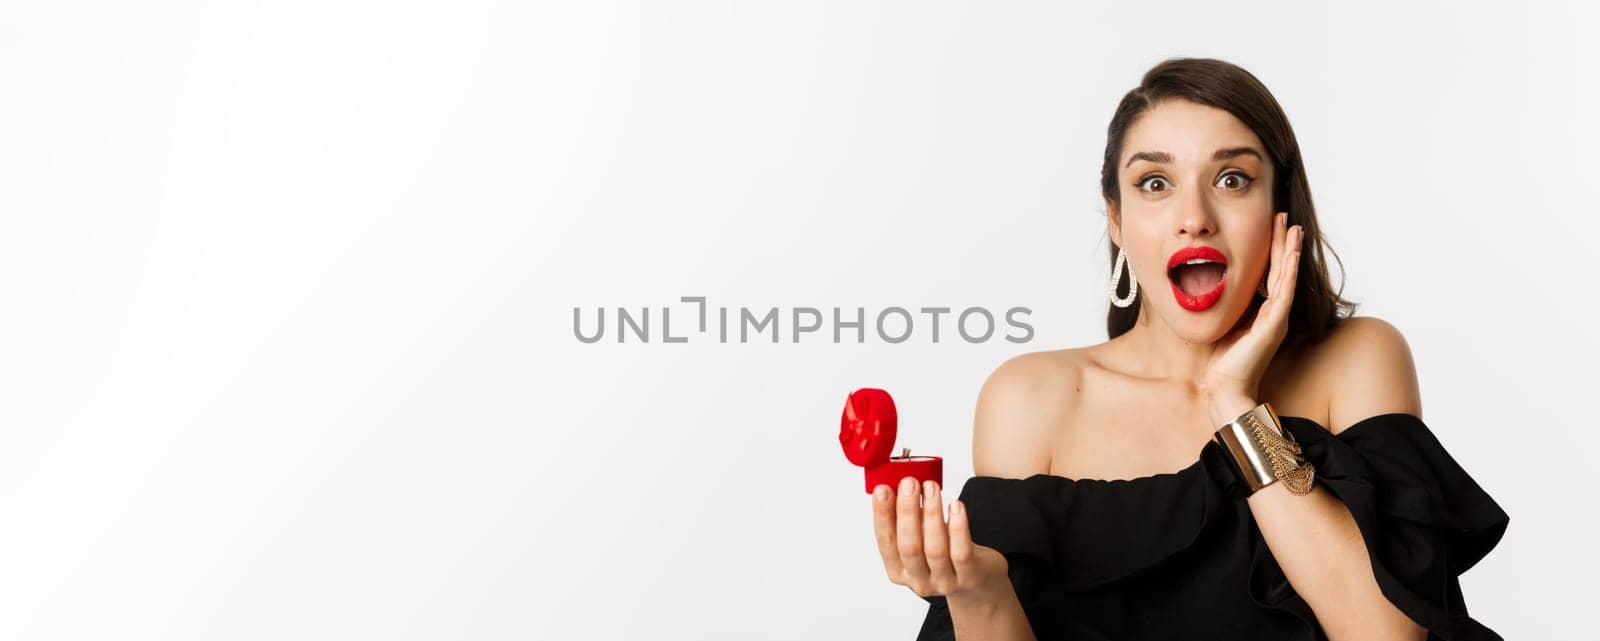 Close-up of attractive young woman with red lipstick, makeup on, looking amazed after receiving marriage proposal, holding engagement ring, standing over white background.